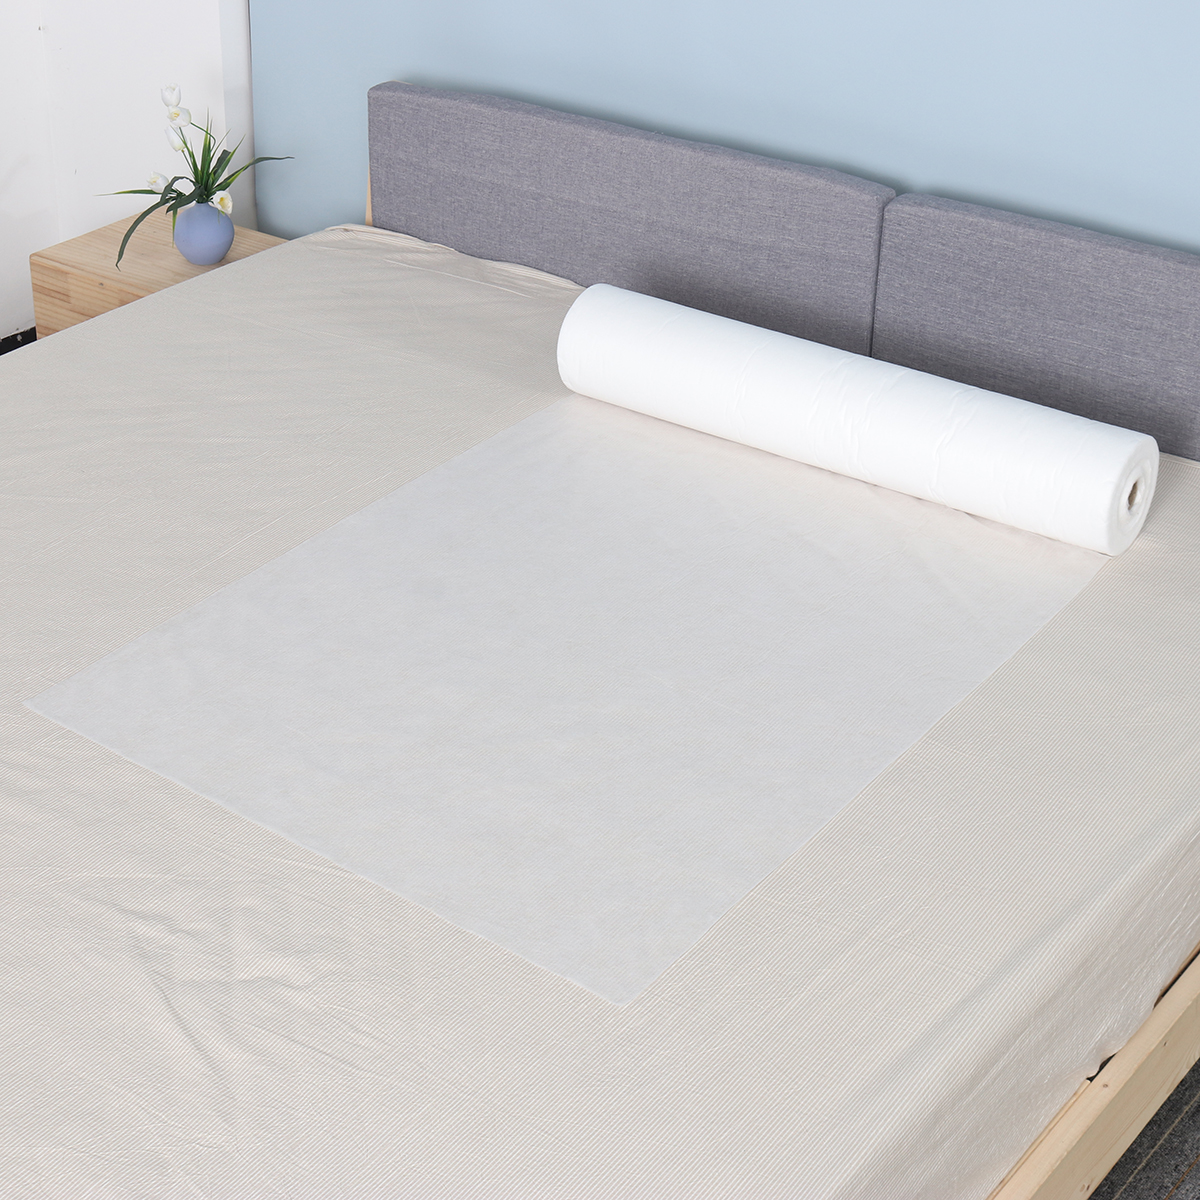 180x80cm-50PcsRoll-Disposable-Massage-Table-Bed-Cover-Sheet-Beauty-Waxing-1737148-7